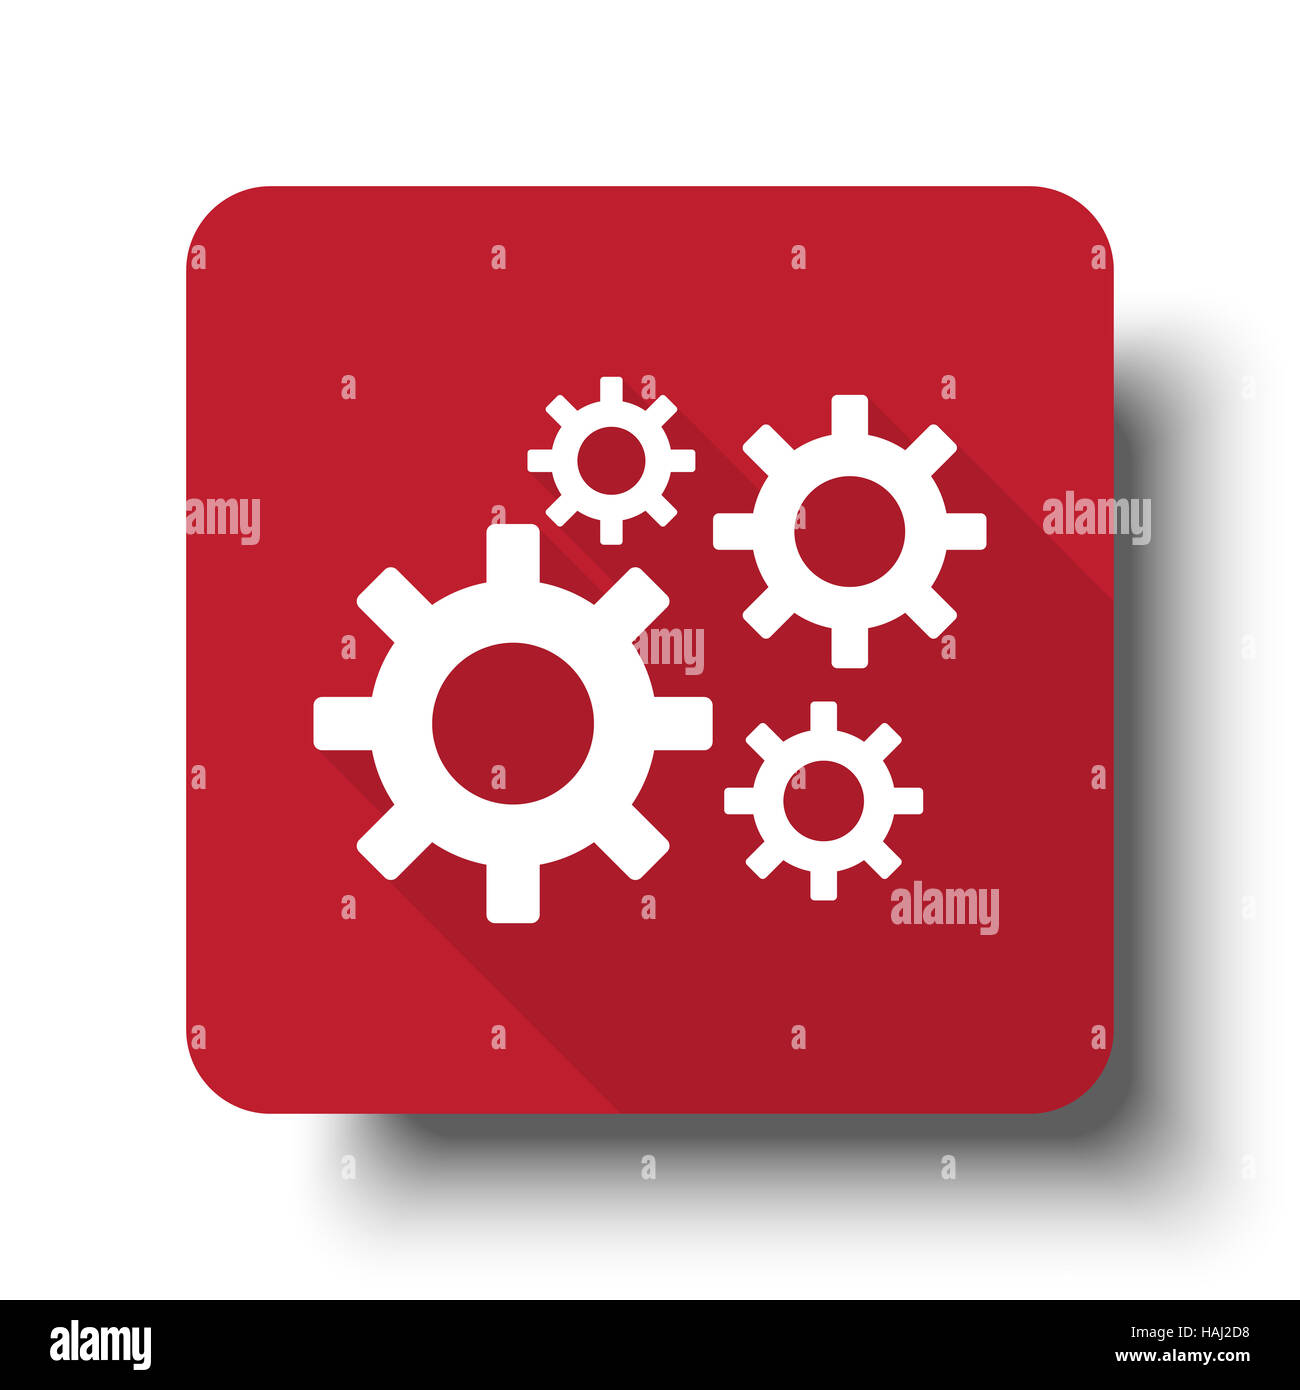 Flat Process web icon on red button with drop shadow Stock Photo